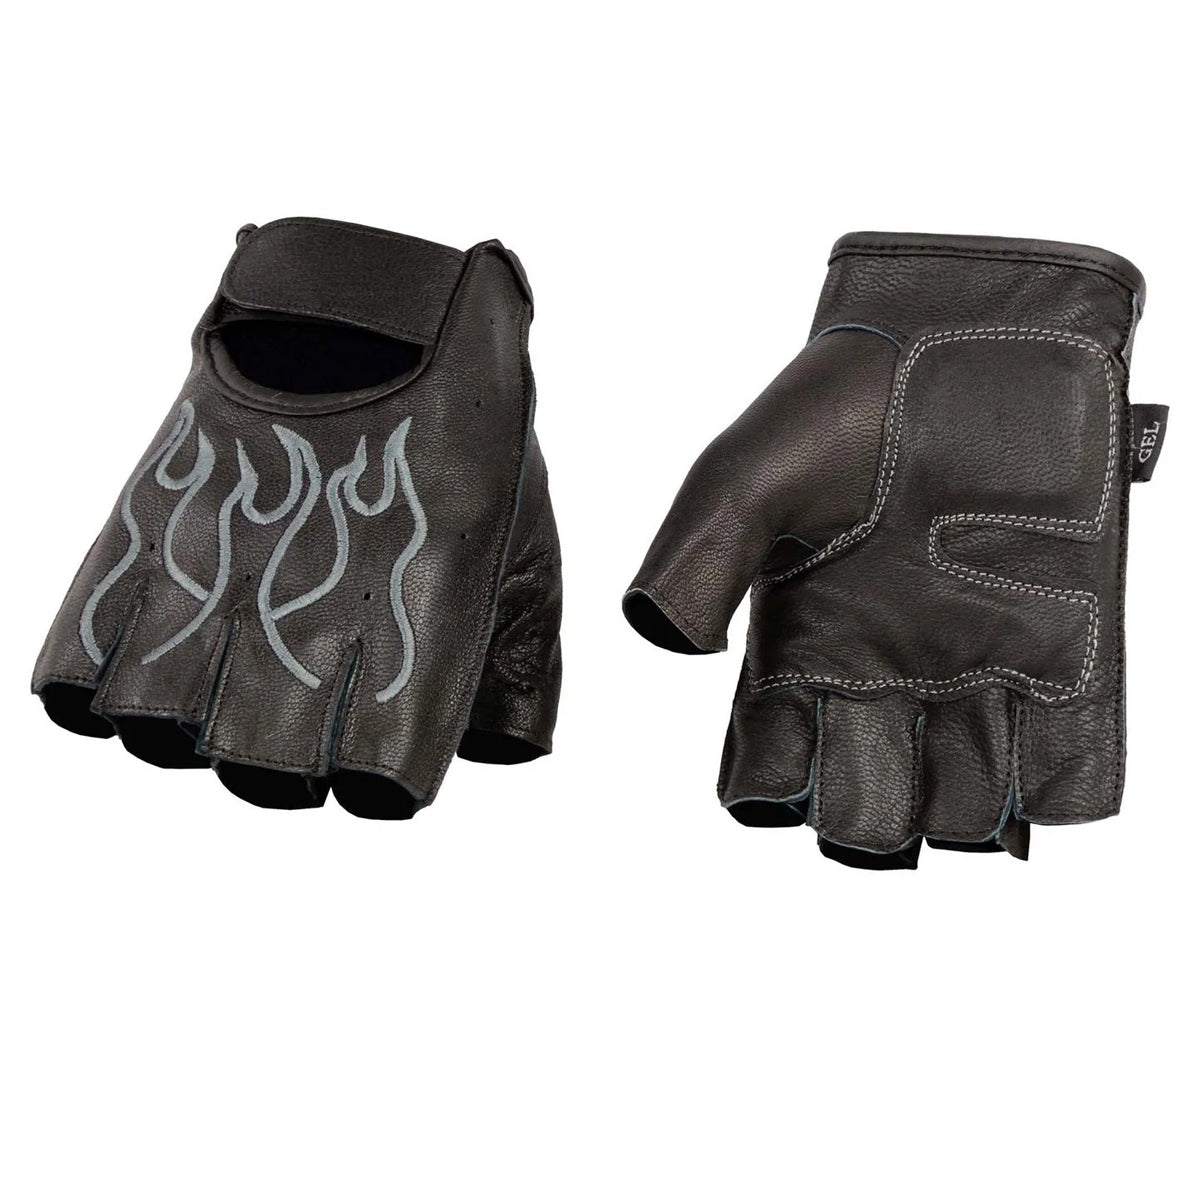 Men's Black Leather Gel Padded Palm Fingerless Motorcycle Hand Gloves W/ ‘Grey Flame Embroidered’